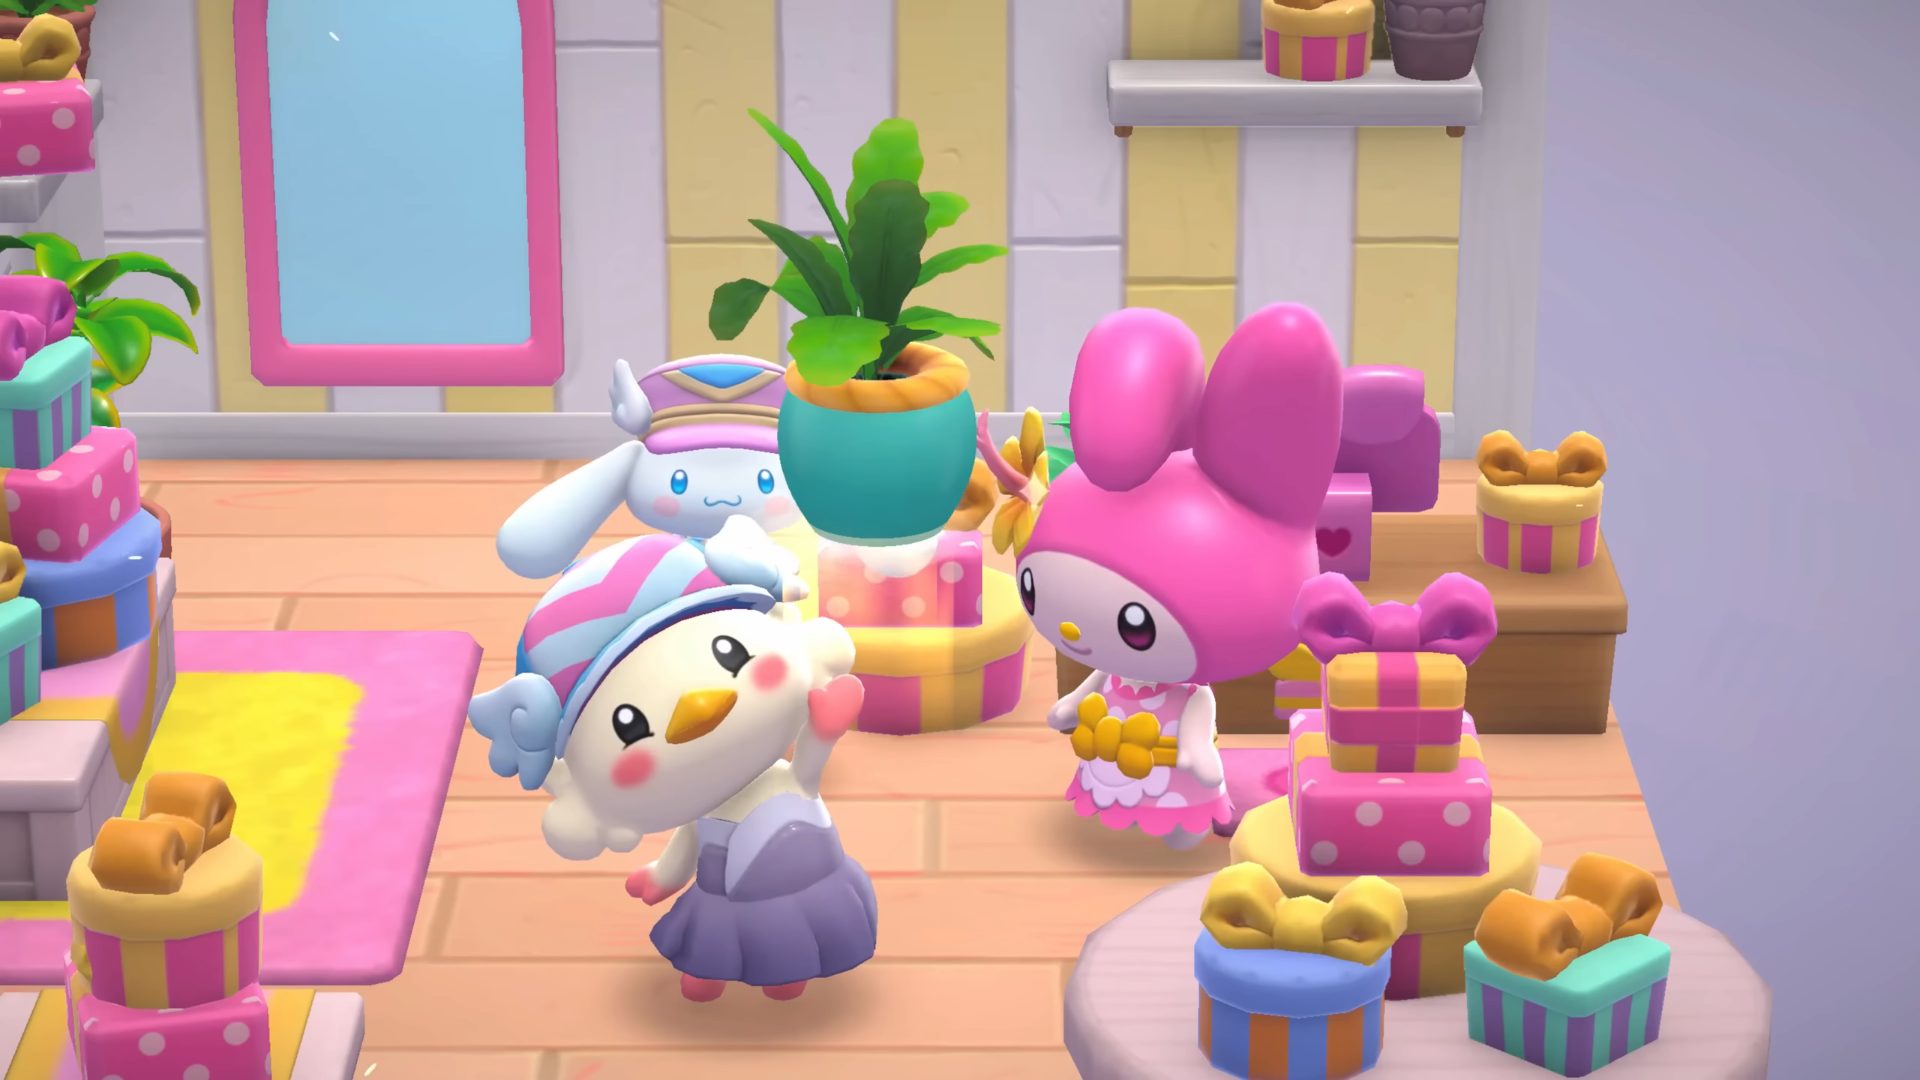 Plant received from My Melody in Hello Kitty Island Adventure